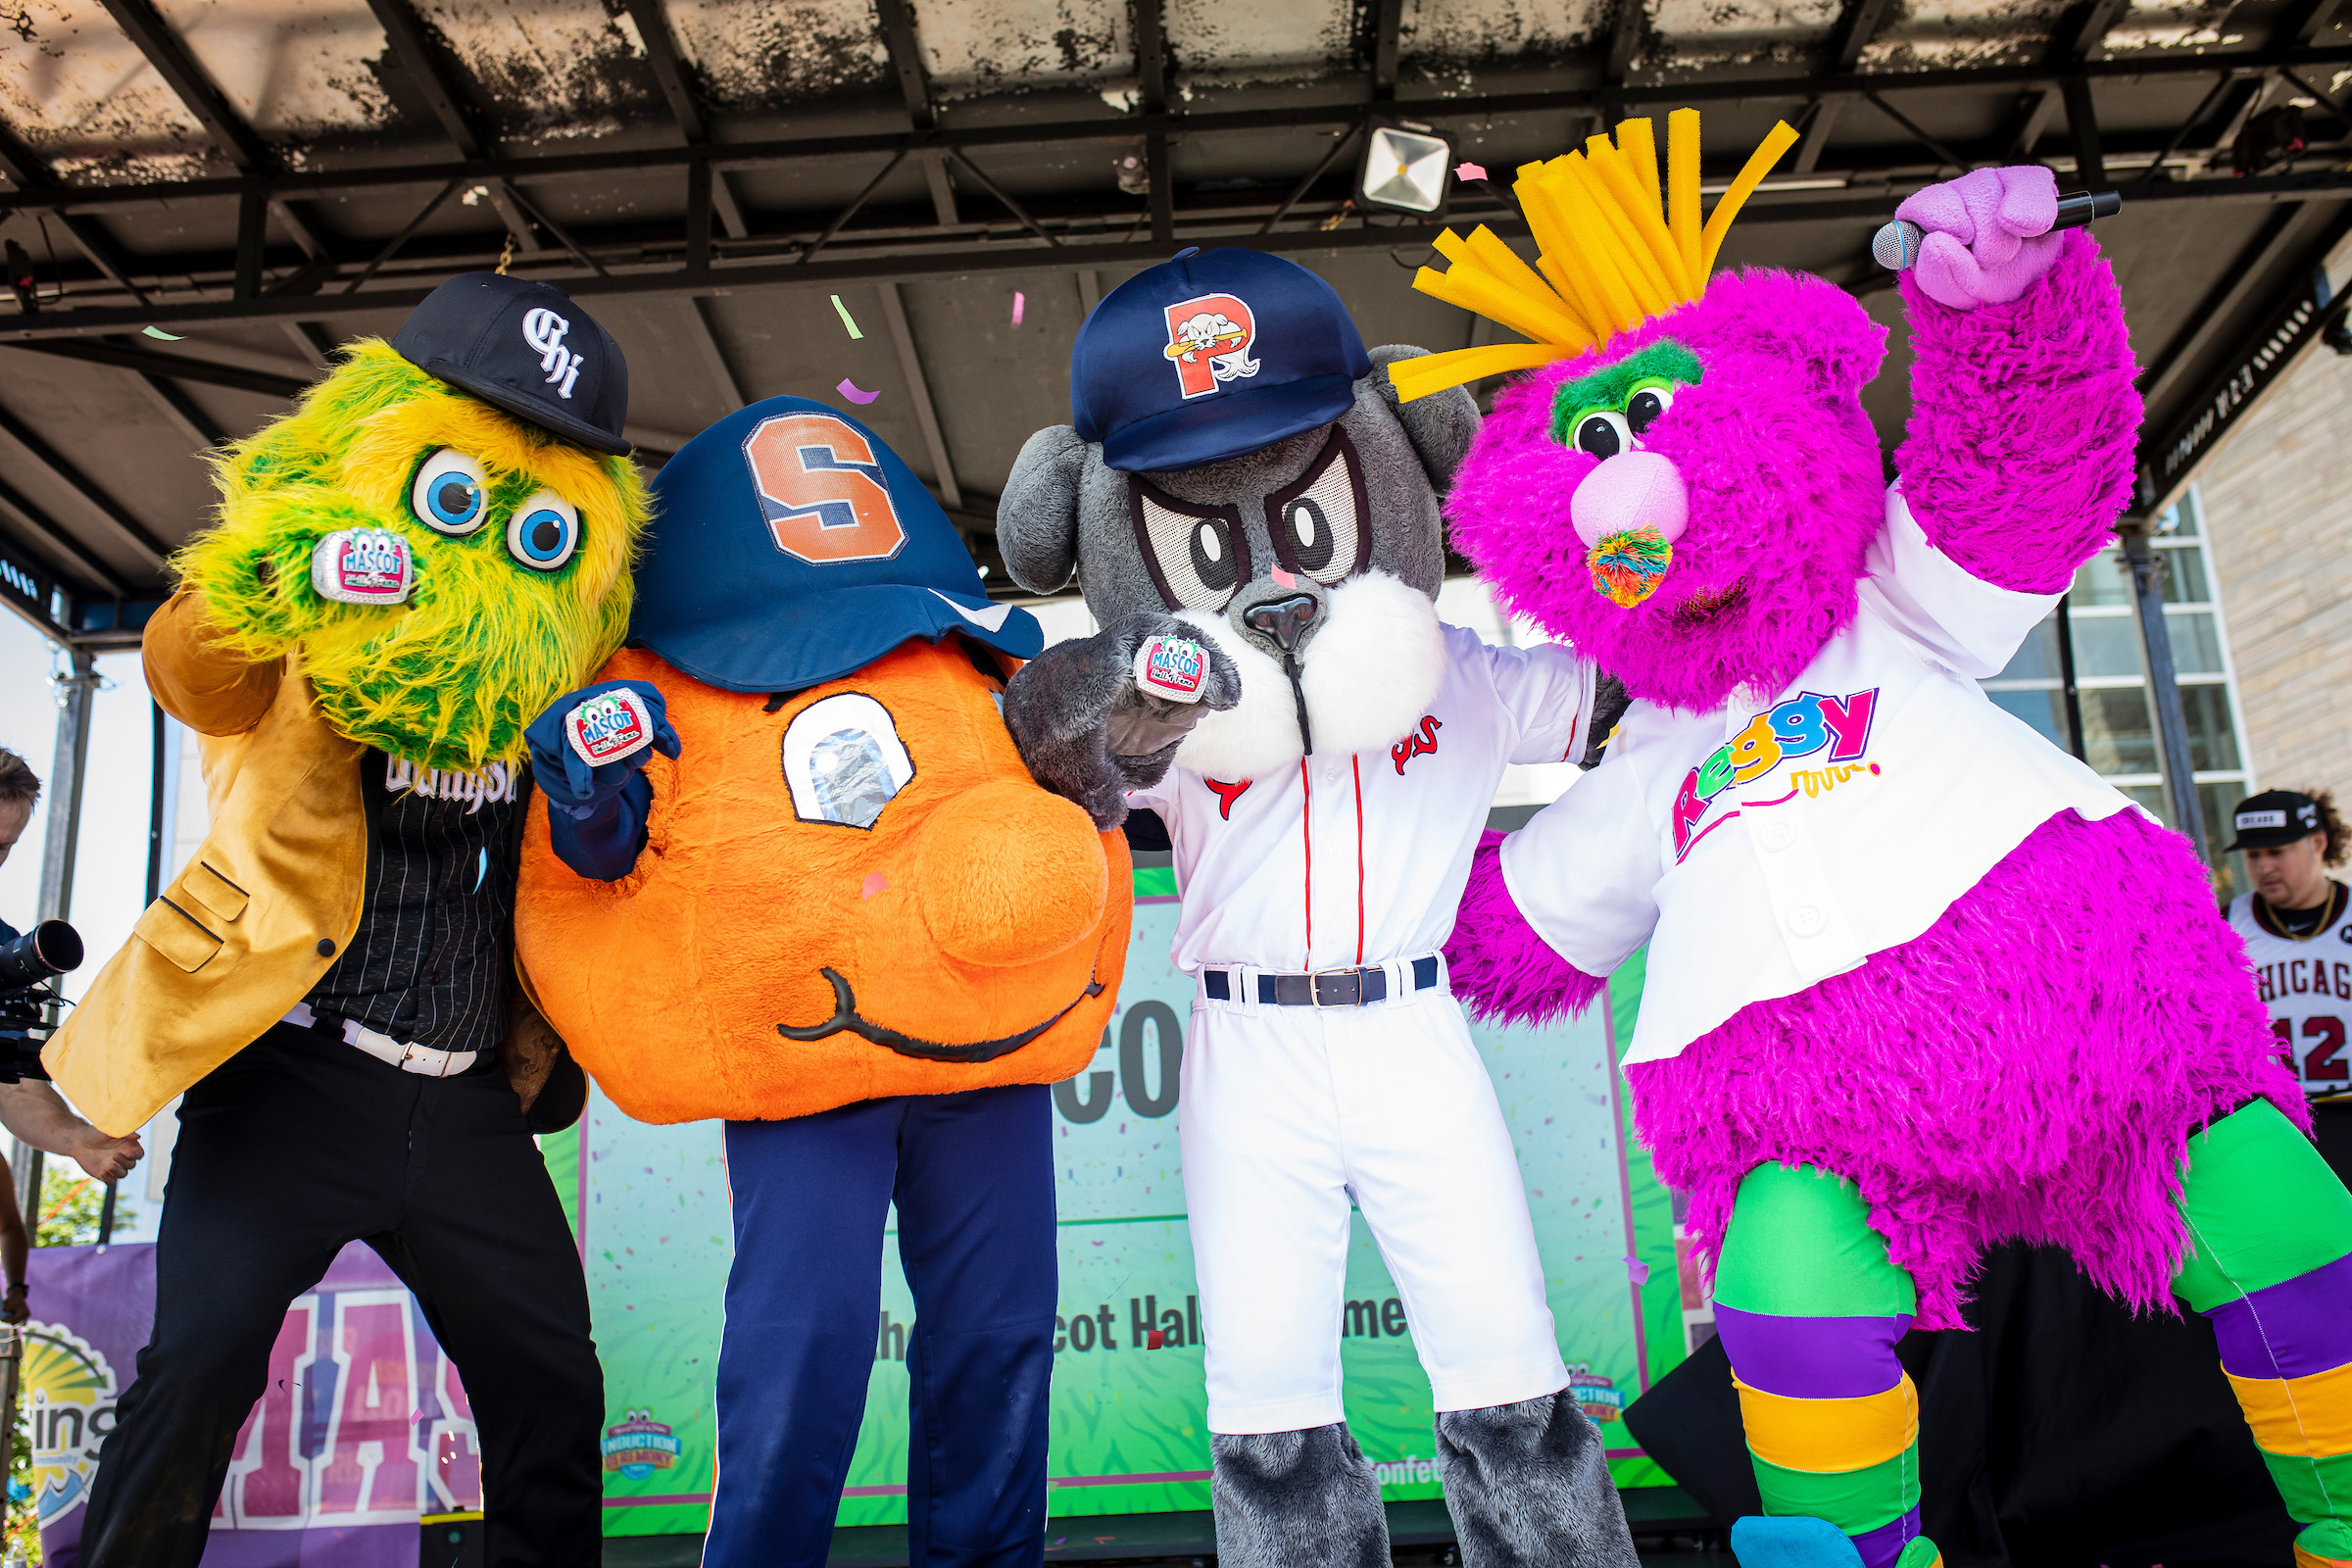 Four mascots standing together on stage. 